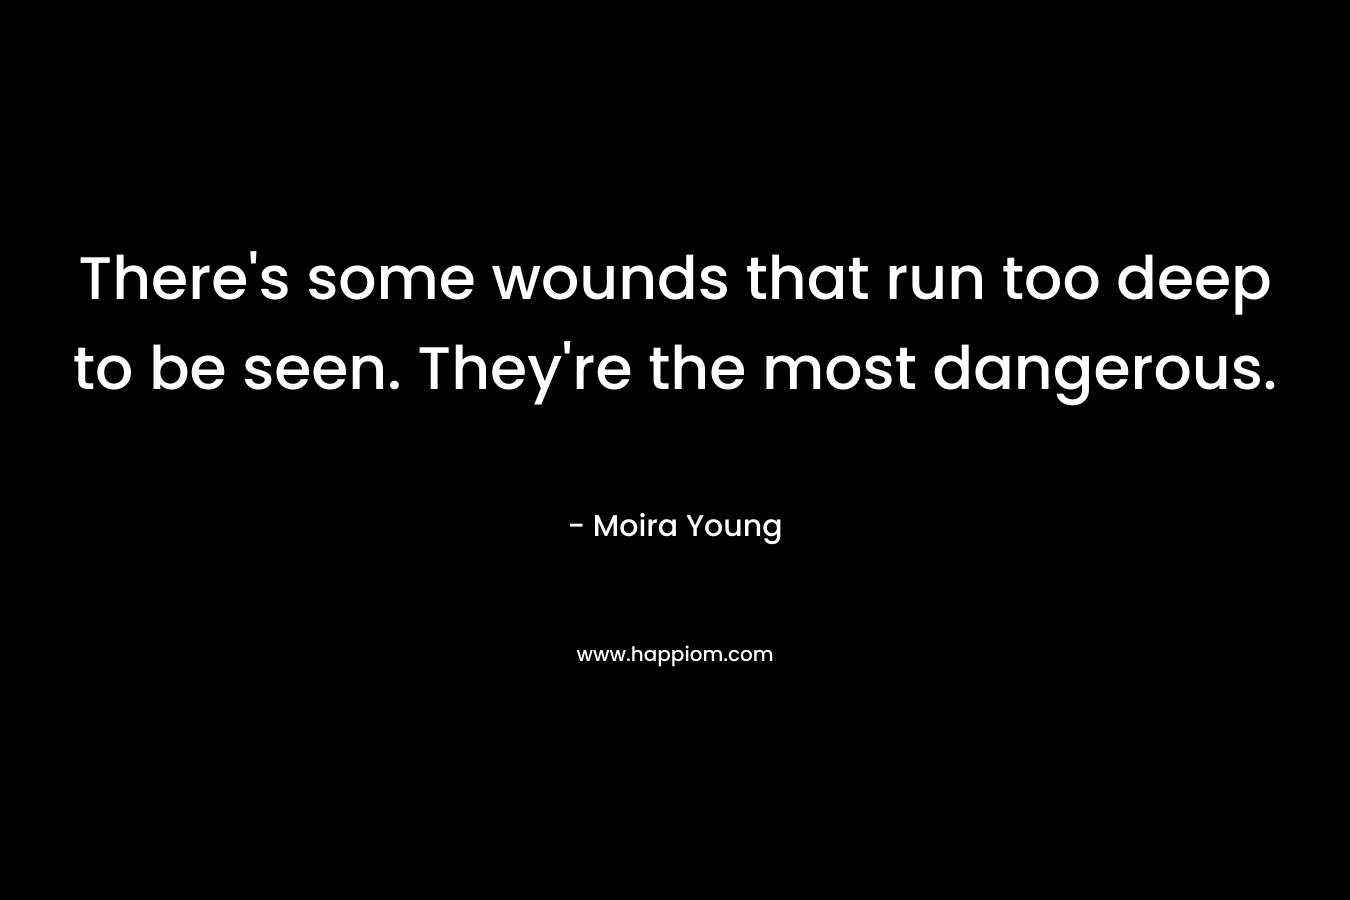 There's some wounds that run too deep to be seen. They're the most dangerous.